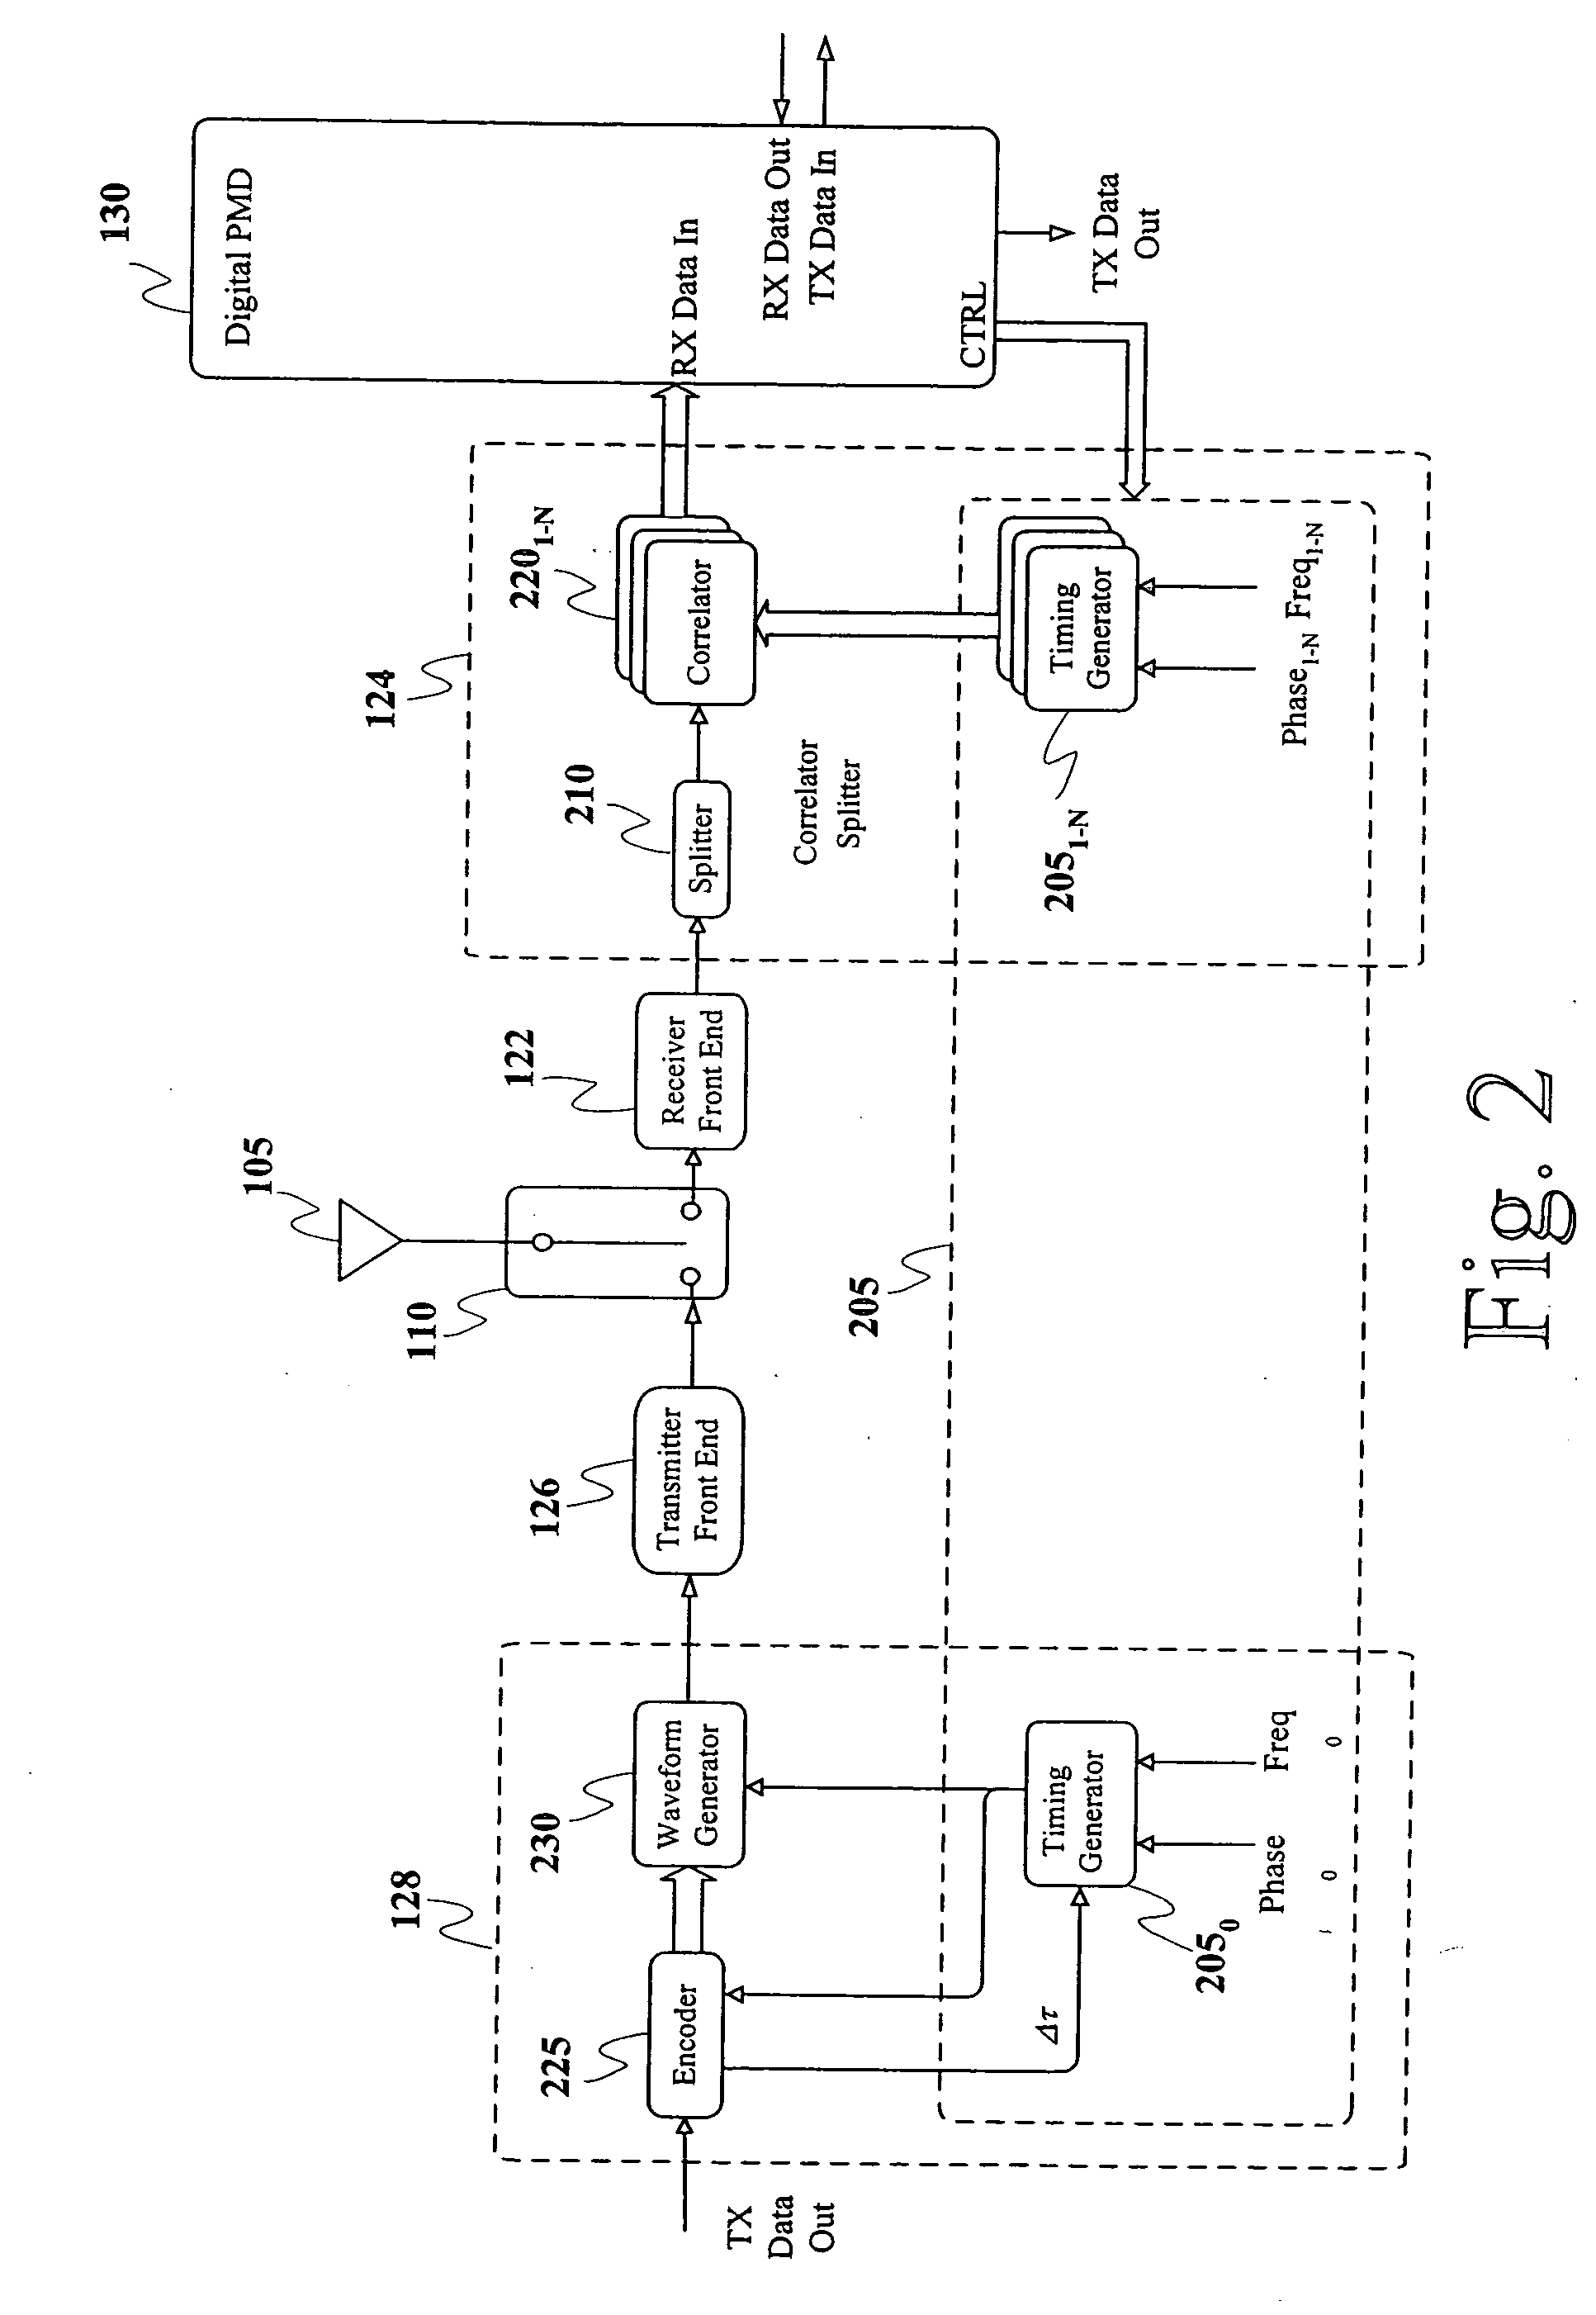 Method and system for performing distance measuring and direction finding using ultrawide bandwitdh transmissions